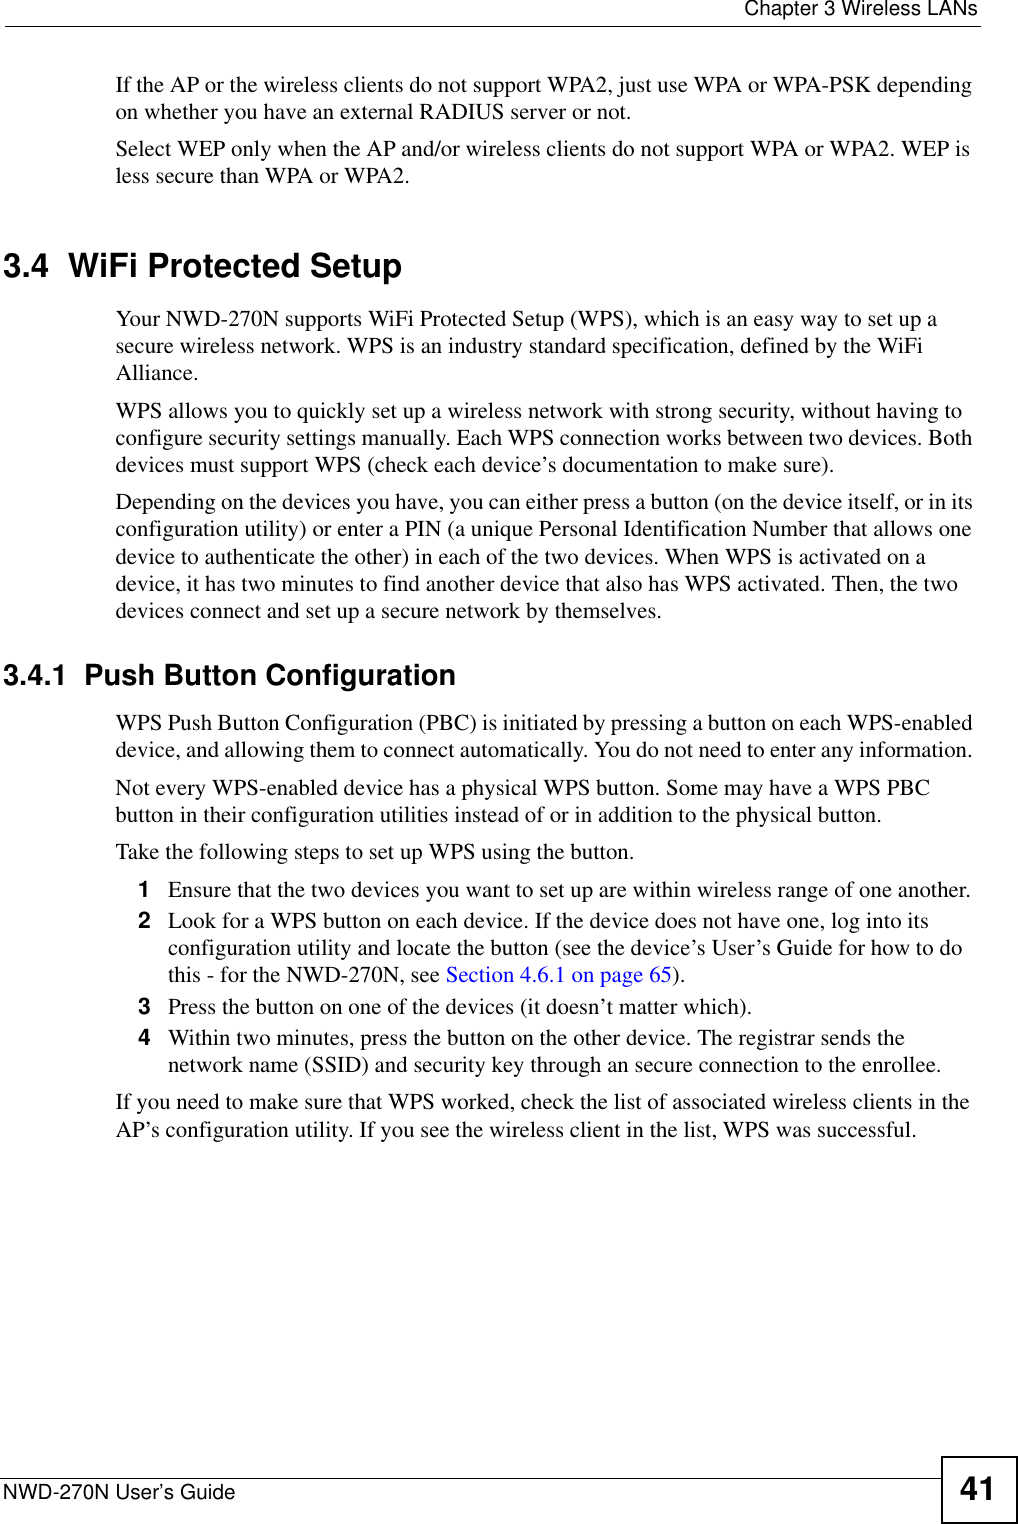  Chapter 3 Wireless LANsNWD-270N User’s Guide 41If the AP or the wireless clients do not support WPA2, just use WPA or WPA-PSK depending on whether you have an external RADIUS server or not.Select WEP only when the AP and/or wireless clients do not support WPA or WPA2. WEP is less secure than WPA or WPA2.3.4  WiFi Protected SetupYour NWD-270N supports WiFi Protected Setup (WPS), which is an easy way to set up a secure wireless network. WPS is an industry standard specification, defined by the WiFi Alliance.WPS allows you to quickly set up a wireless network with strong security, without having to configure security settings manually. Each WPS connection works between two devices. Both devices must support WPS (check each device’s documentation to make sure). Depending on the devices you have, you can either press a button (on the device itself, or in its configuration utility) or enter a PIN (a unique Personal Identification Number that allows one device to authenticate the other) in each of the two devices. When WPS is activated on a device, it has two minutes to find another device that also has WPS activated. Then, the two devices connect and set up a secure network by themselves.3.4.1  Push Button ConfigurationWPS Push Button Configuration (PBC) is initiated by pressing a button on each WPS-enabled device, and allowing them to connect automatically. You do not need to enter any information. Not every WPS-enabled device has a physical WPS button. Some may have a WPS PBC button in their configuration utilities instead of or in addition to the physical button.Take the following steps to set up WPS using the button.1Ensure that the two devices you want to set up are within wireless range of one another. 2Look for a WPS button on each device. If the device does not have one, log into its configuration utility and locate the button (see the device’s User’s Guide for how to do this - for the NWD-270N, see Section 4.6.1 on page 65).3Press the button on one of the devices (it doesn’t matter which).4Within two minutes, press the button on the other device. The registrar sends the network name (SSID) and security key through an secure connection to the enrollee.If you need to make sure that WPS worked, check the list of associated wireless clients in the AP’s configuration utility. If you see the wireless client in the list, WPS was successful.